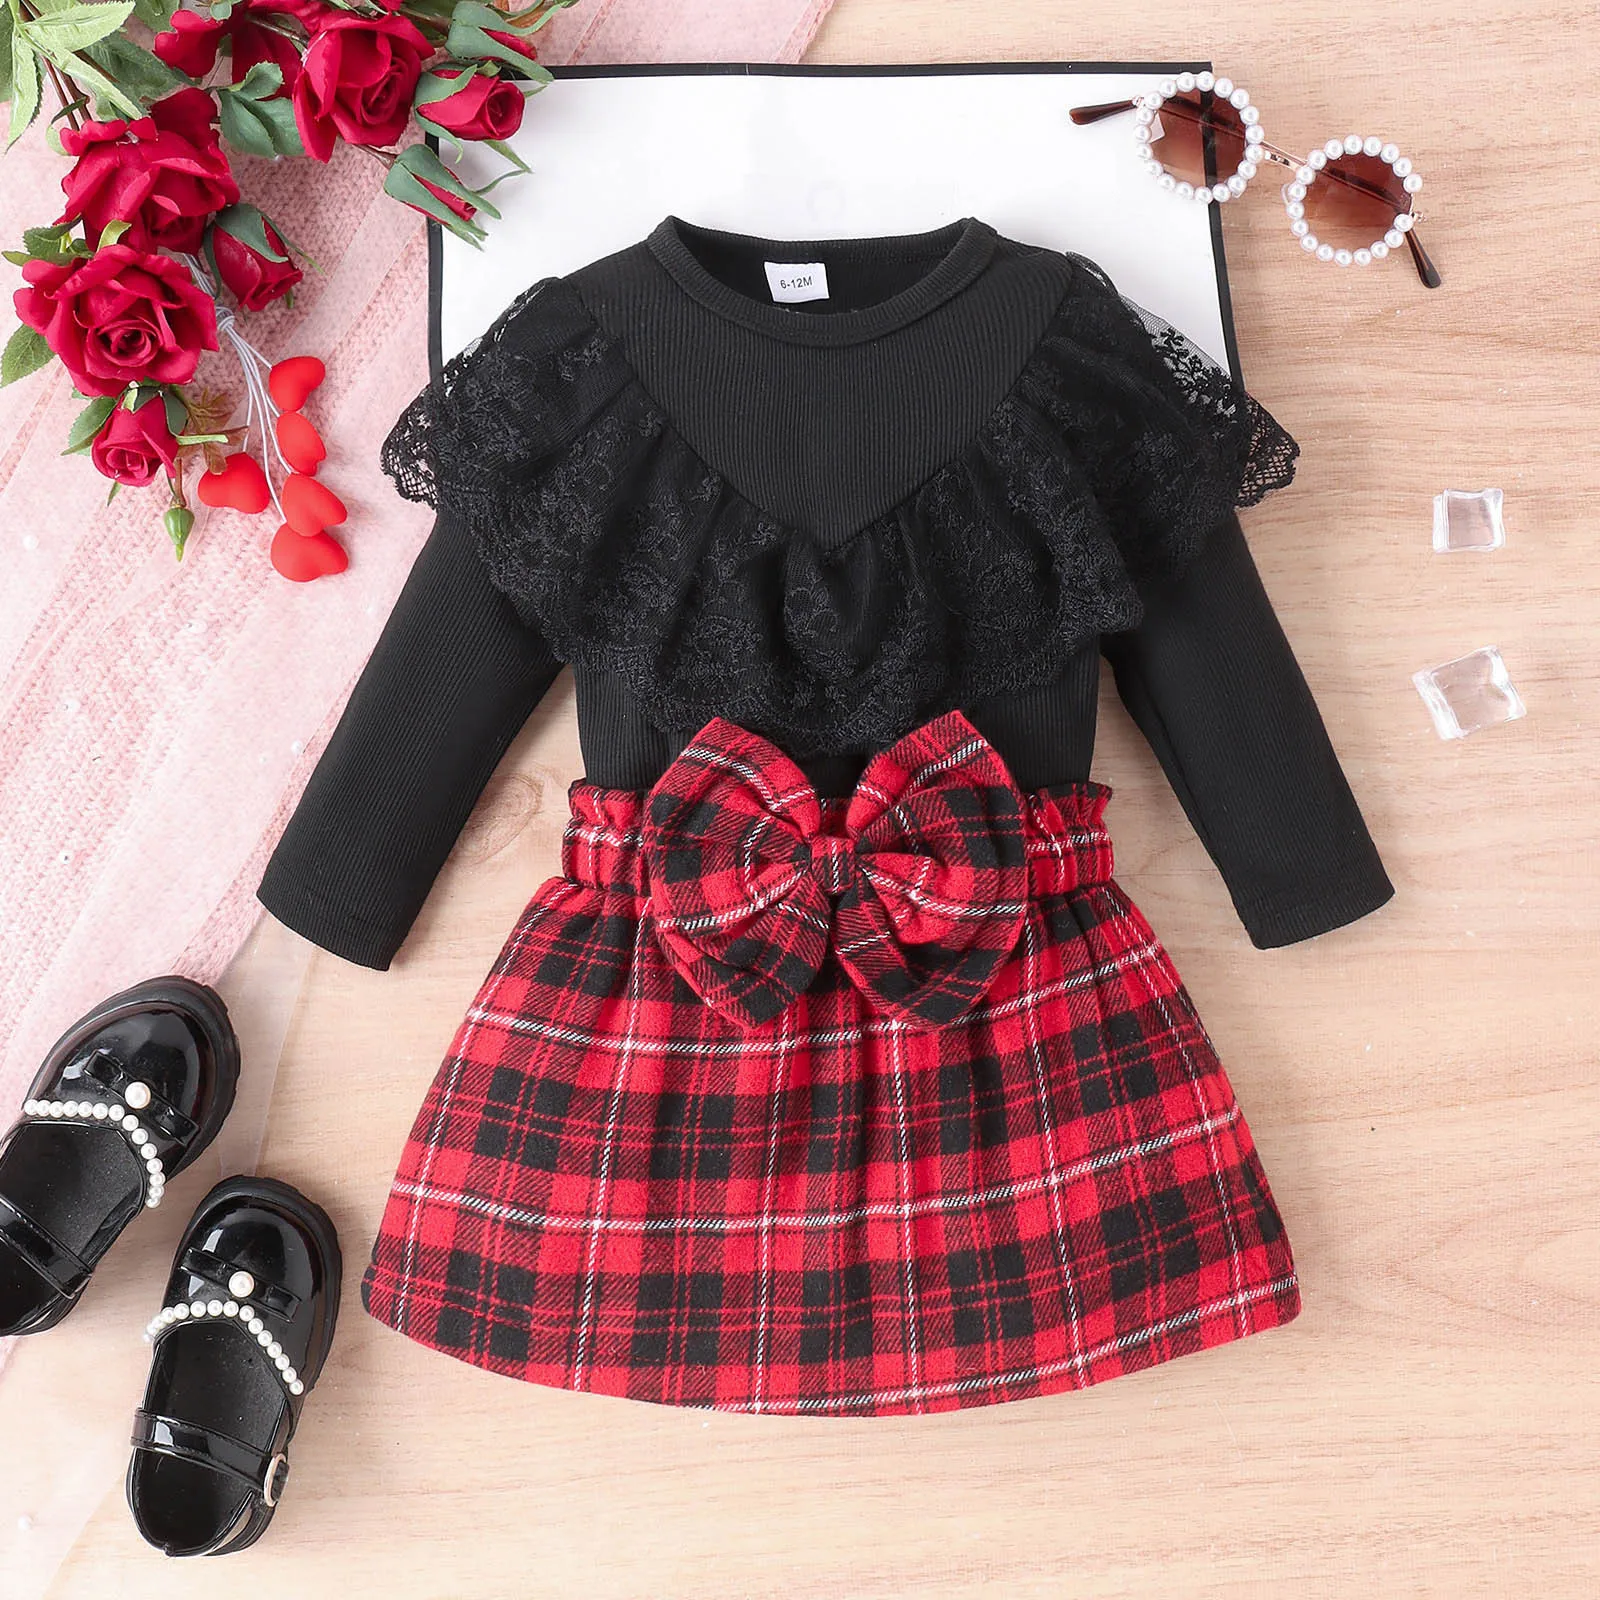 

0-5Y Kids Girls Autumn Winter Outfits Baby Girls Ruffled Ribbed Long Sleeve Tops+Plaid Skirts 2Pcs Sets Children Fashion Clothes